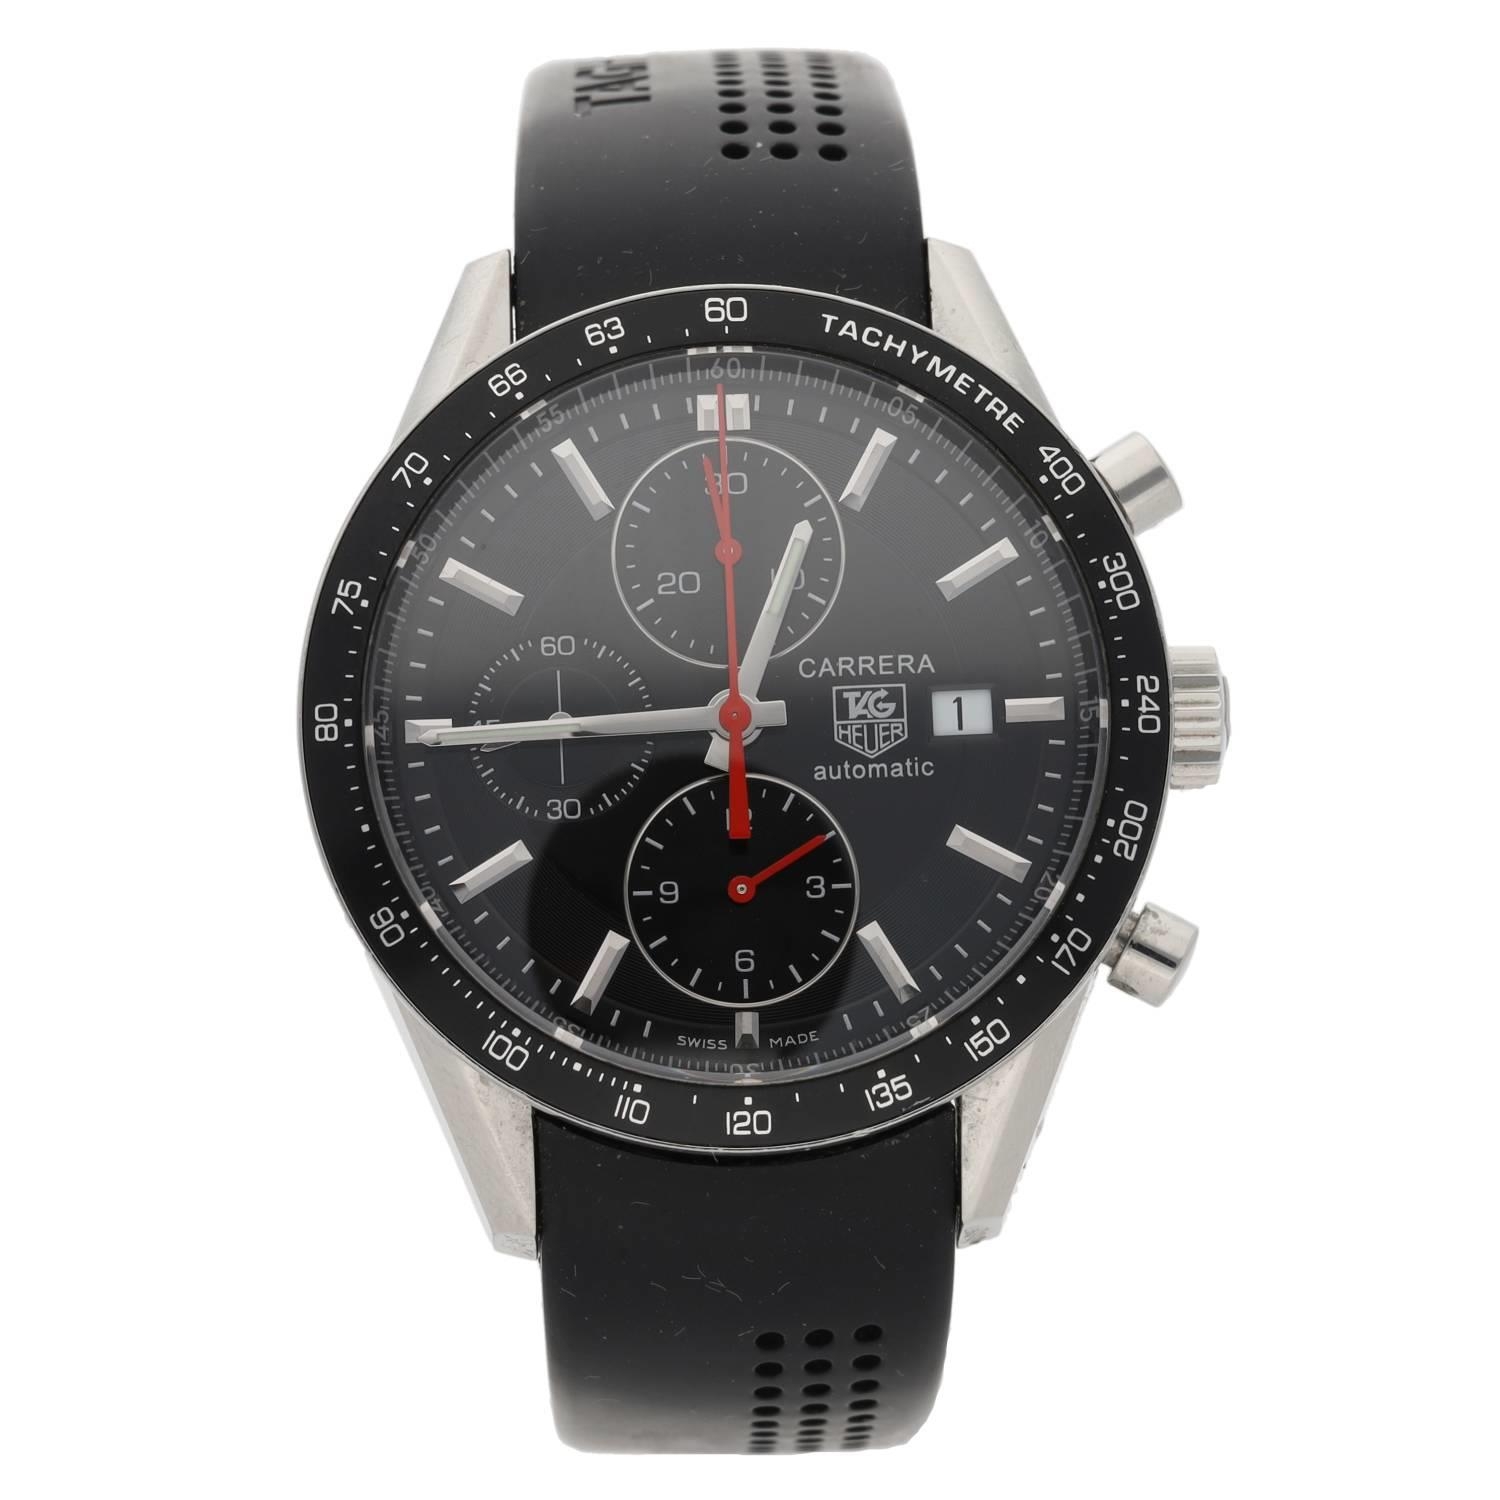 Tag Heuer Carrera Chronograph automatic stainless steel gentleman's wristwatch, ref. CV2014-0,